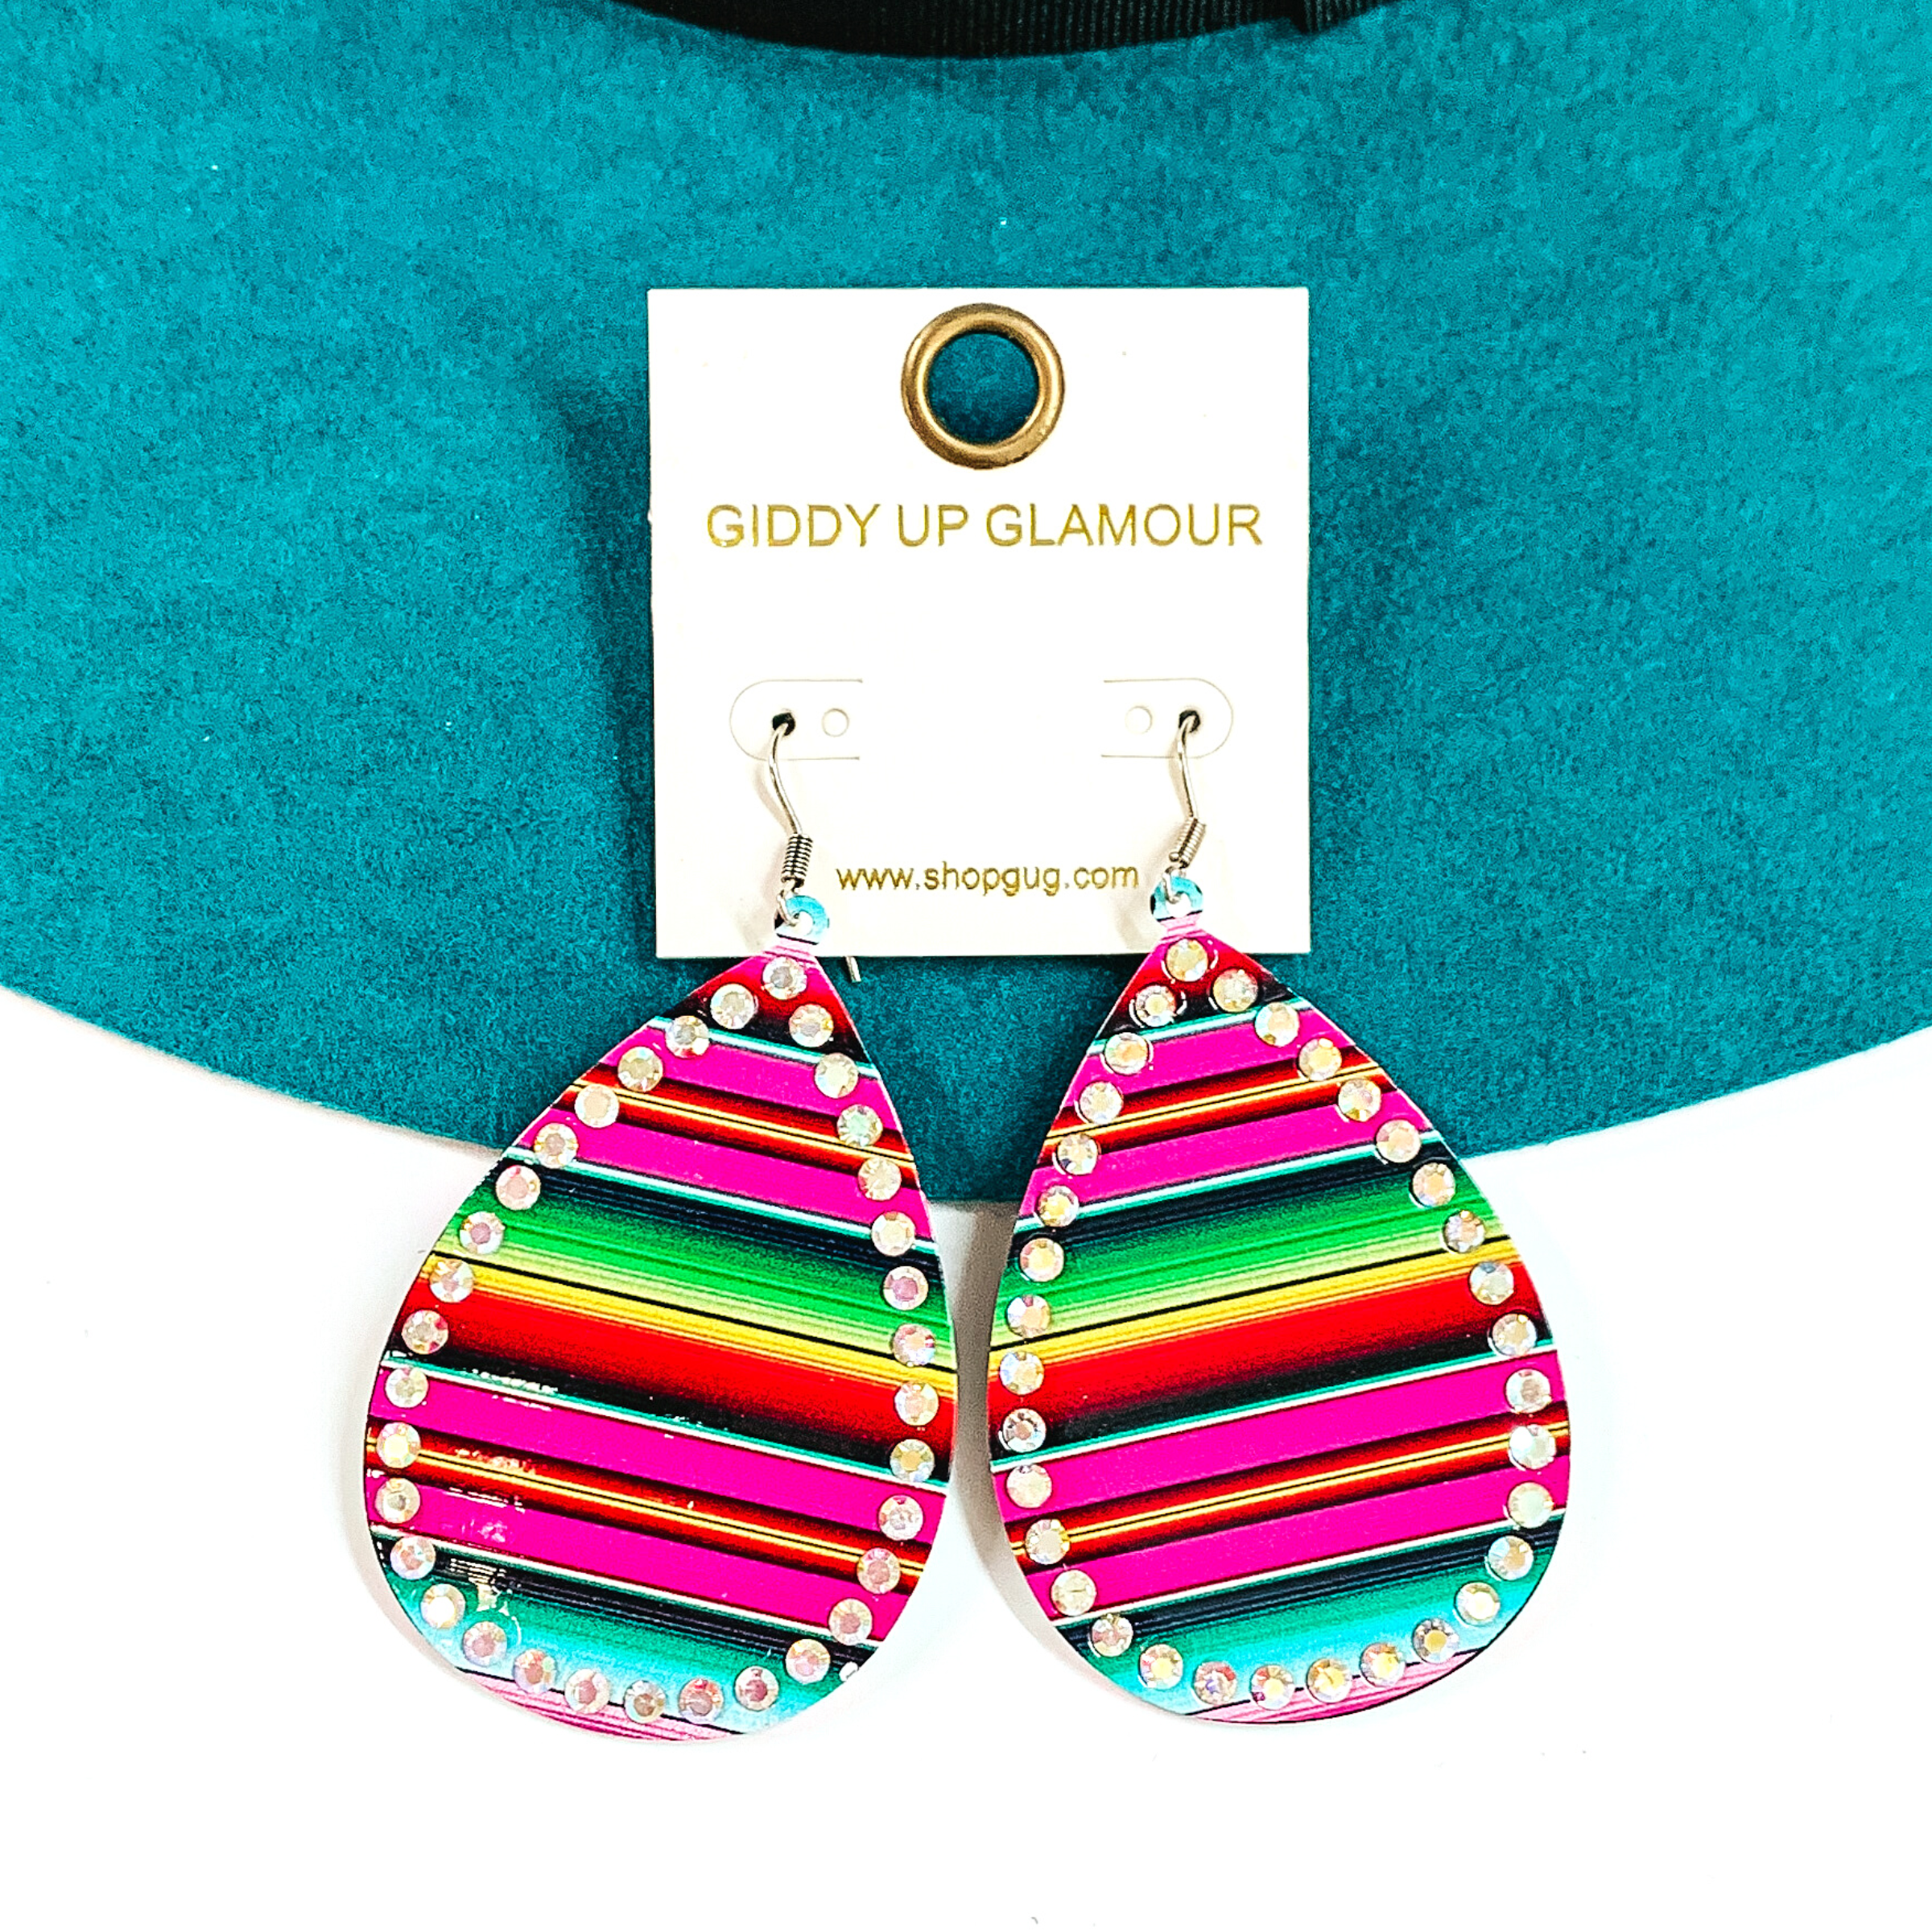 These are teardrop serape print earrings with ab crystals all around. The serape print  is in a pink mix such as; pink, blue, turquoise, green, and a bit of red. These  earrings are taken on a teal felt hat brim and on a white background.